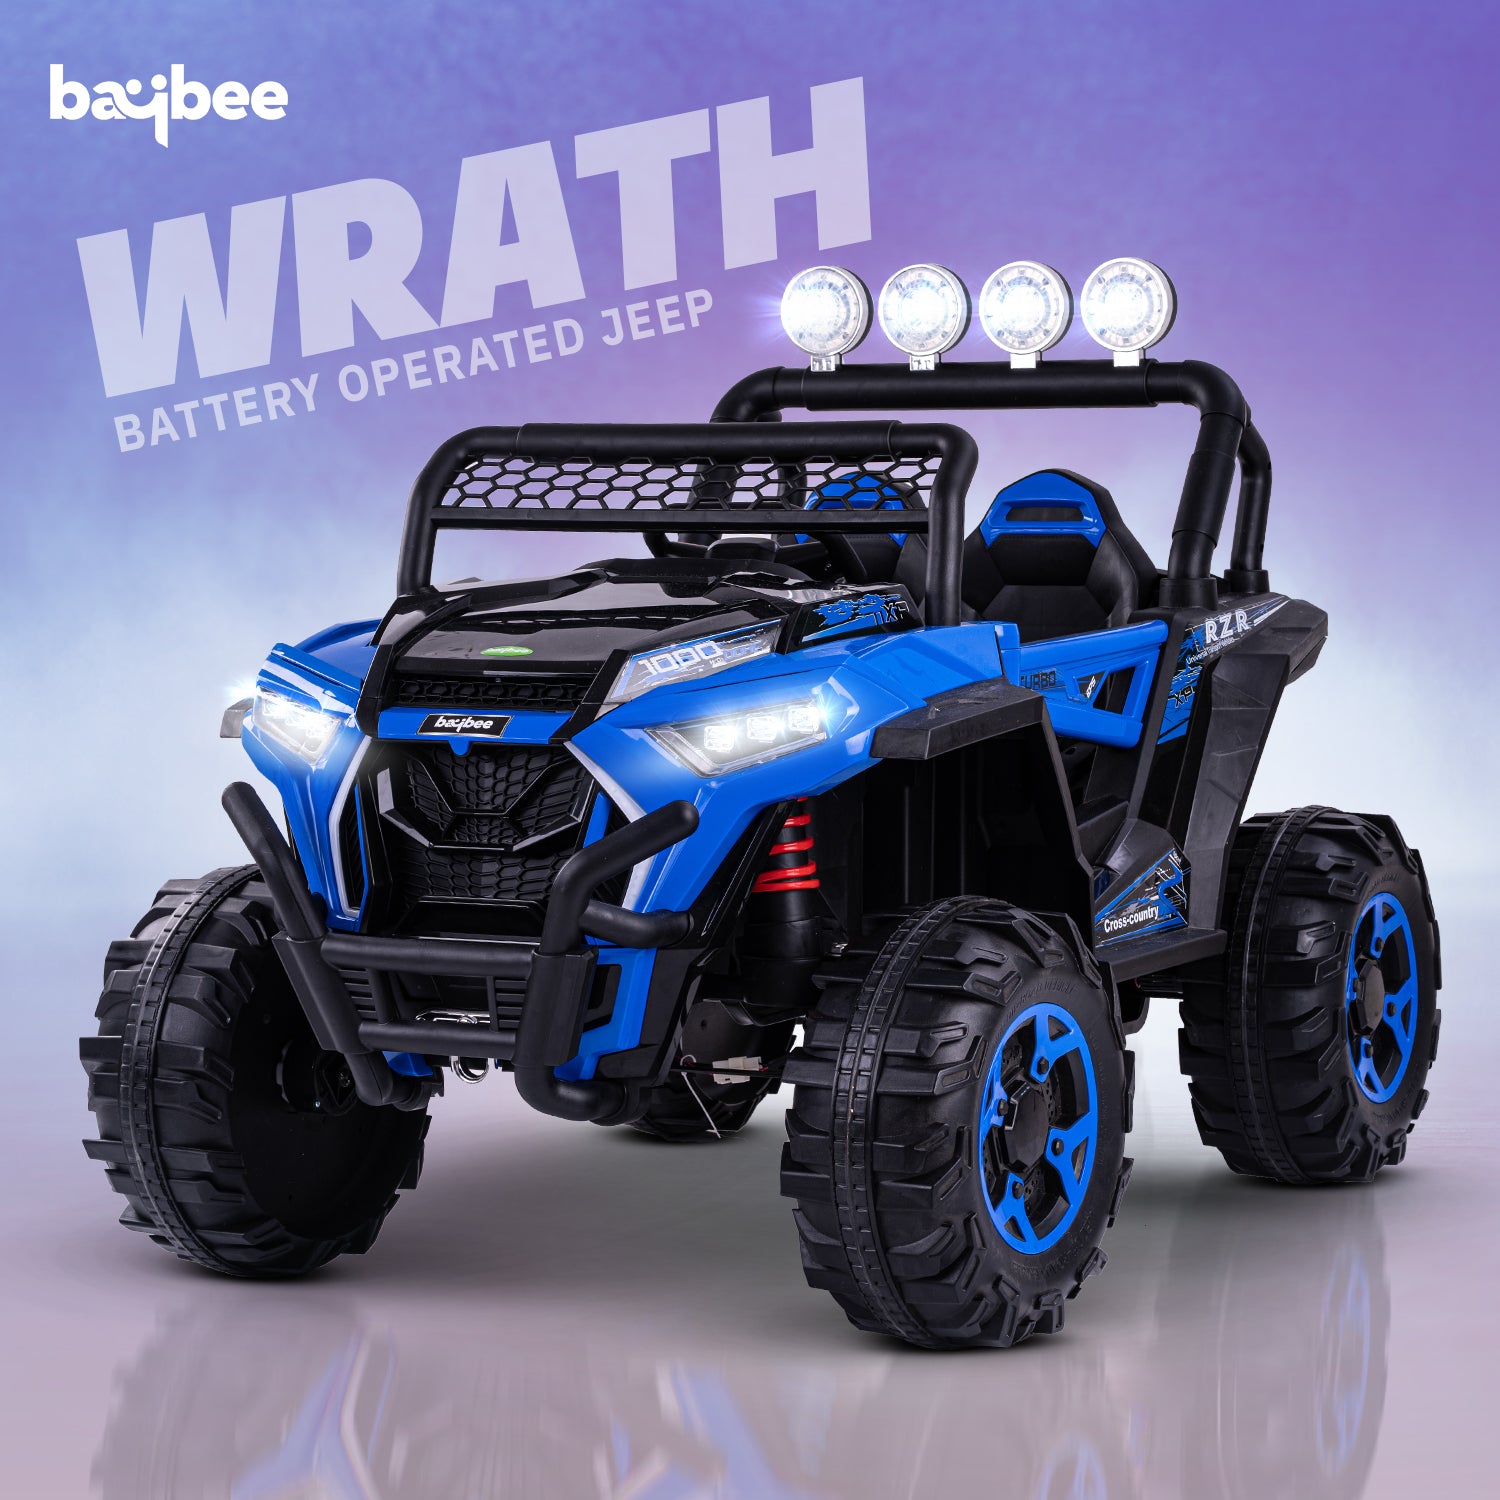 Minikin Wrath 4x4 Rechargeable Battery Operated Jeep I Large Size I 1 to 8 Years